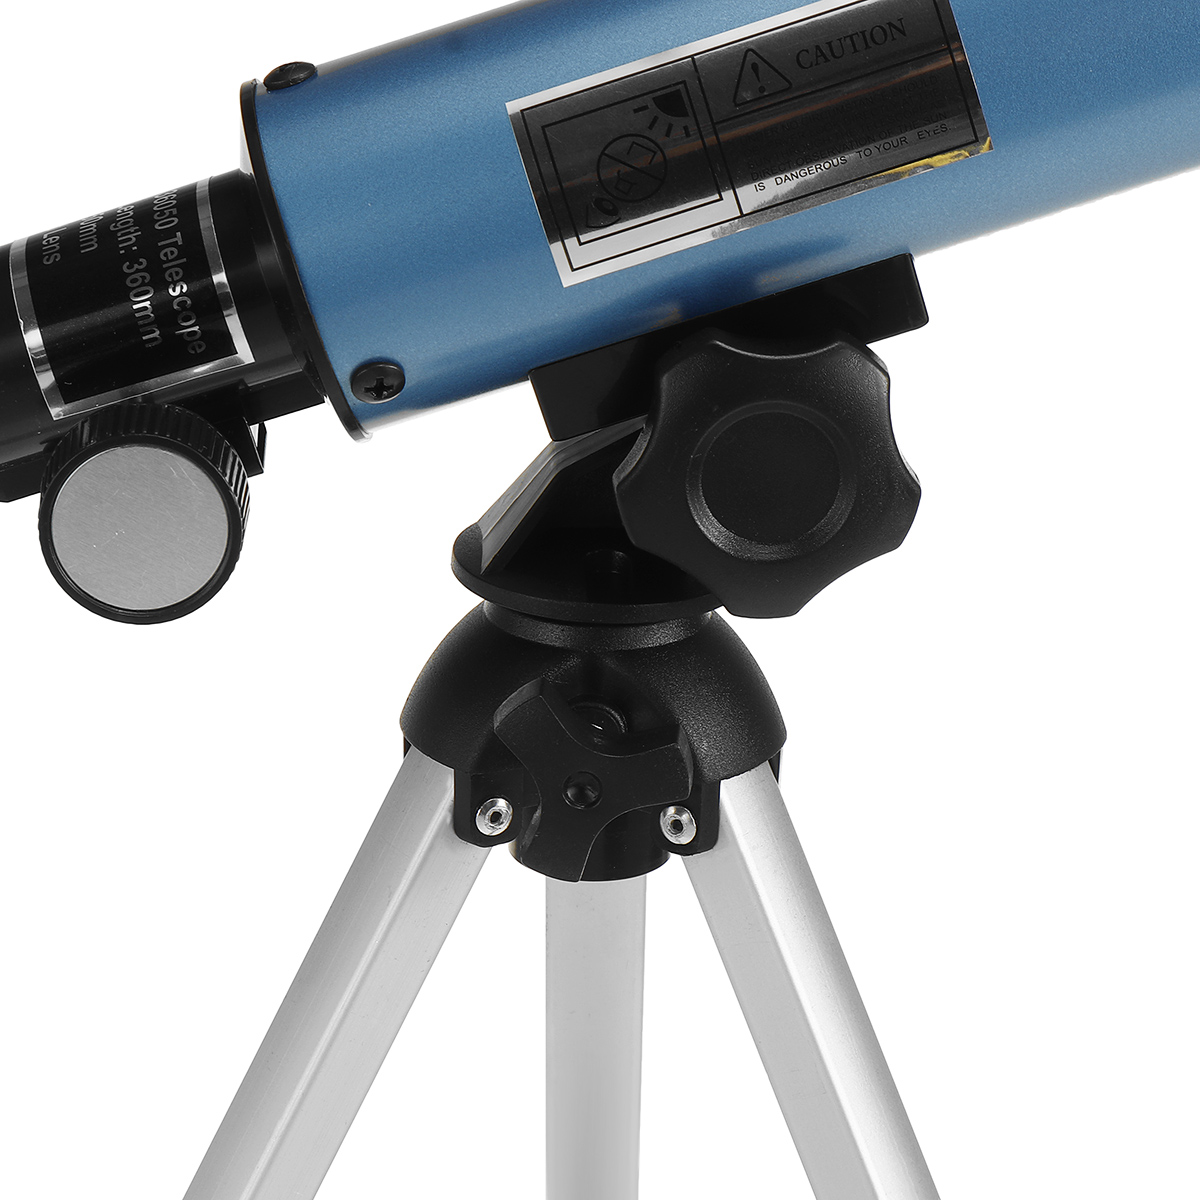 90x-Magnification-Astronomical-Telescope-Clear-Image-with-Remote-Control-and-Camera-Rod-for-Observe--1851121-9